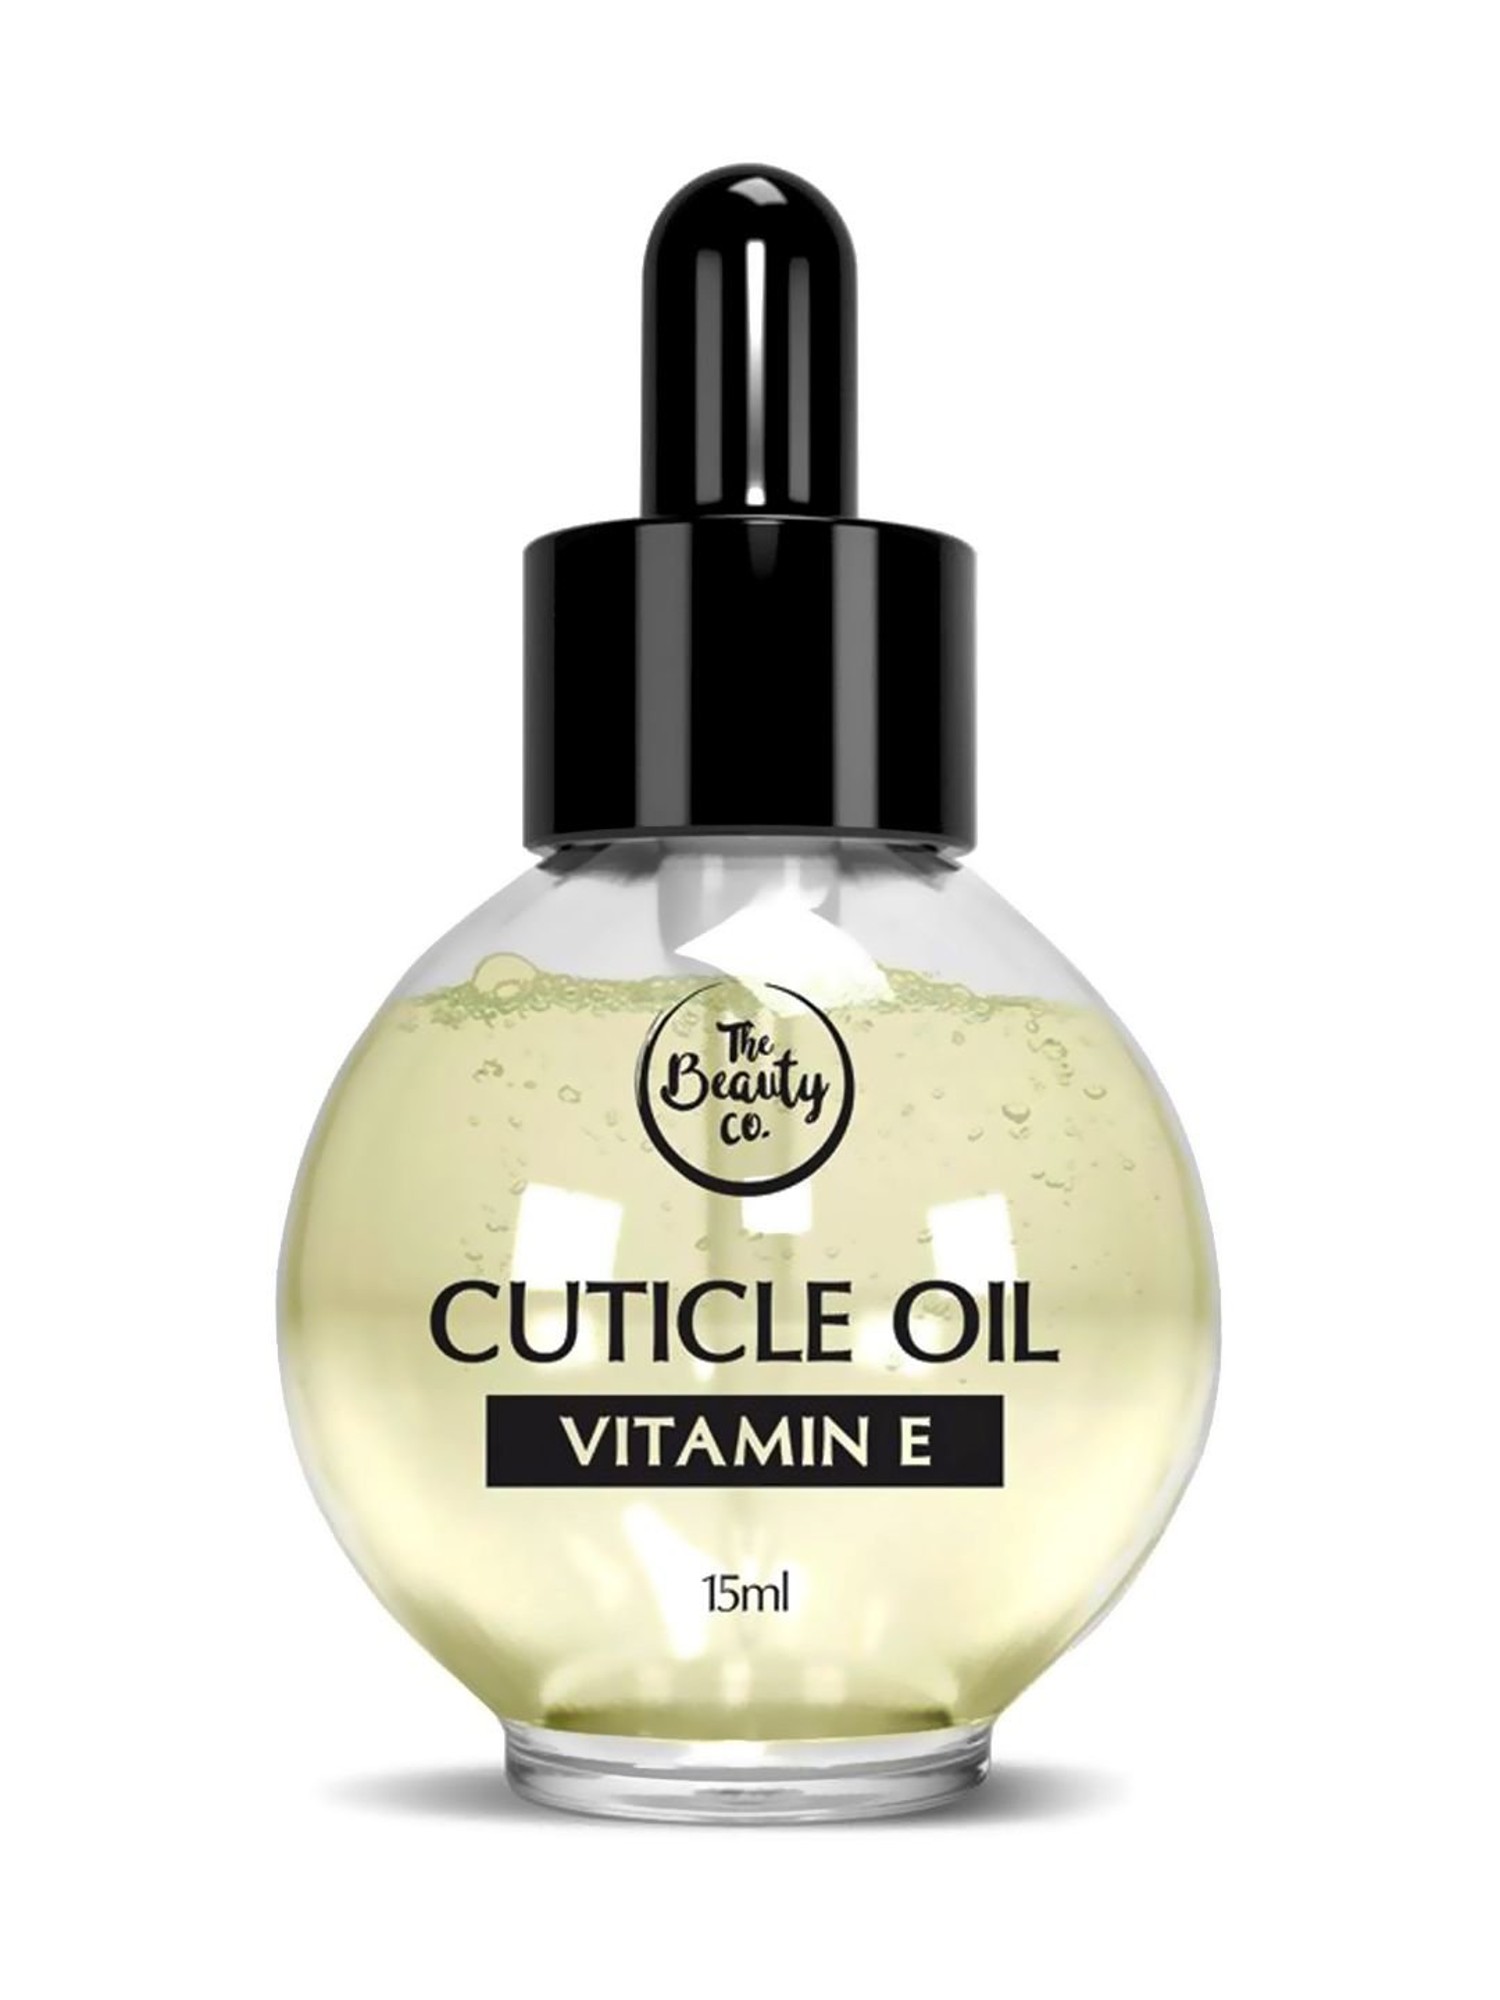 The benefits of vitamin E on hair skin nails and body  Madame La  Présidente